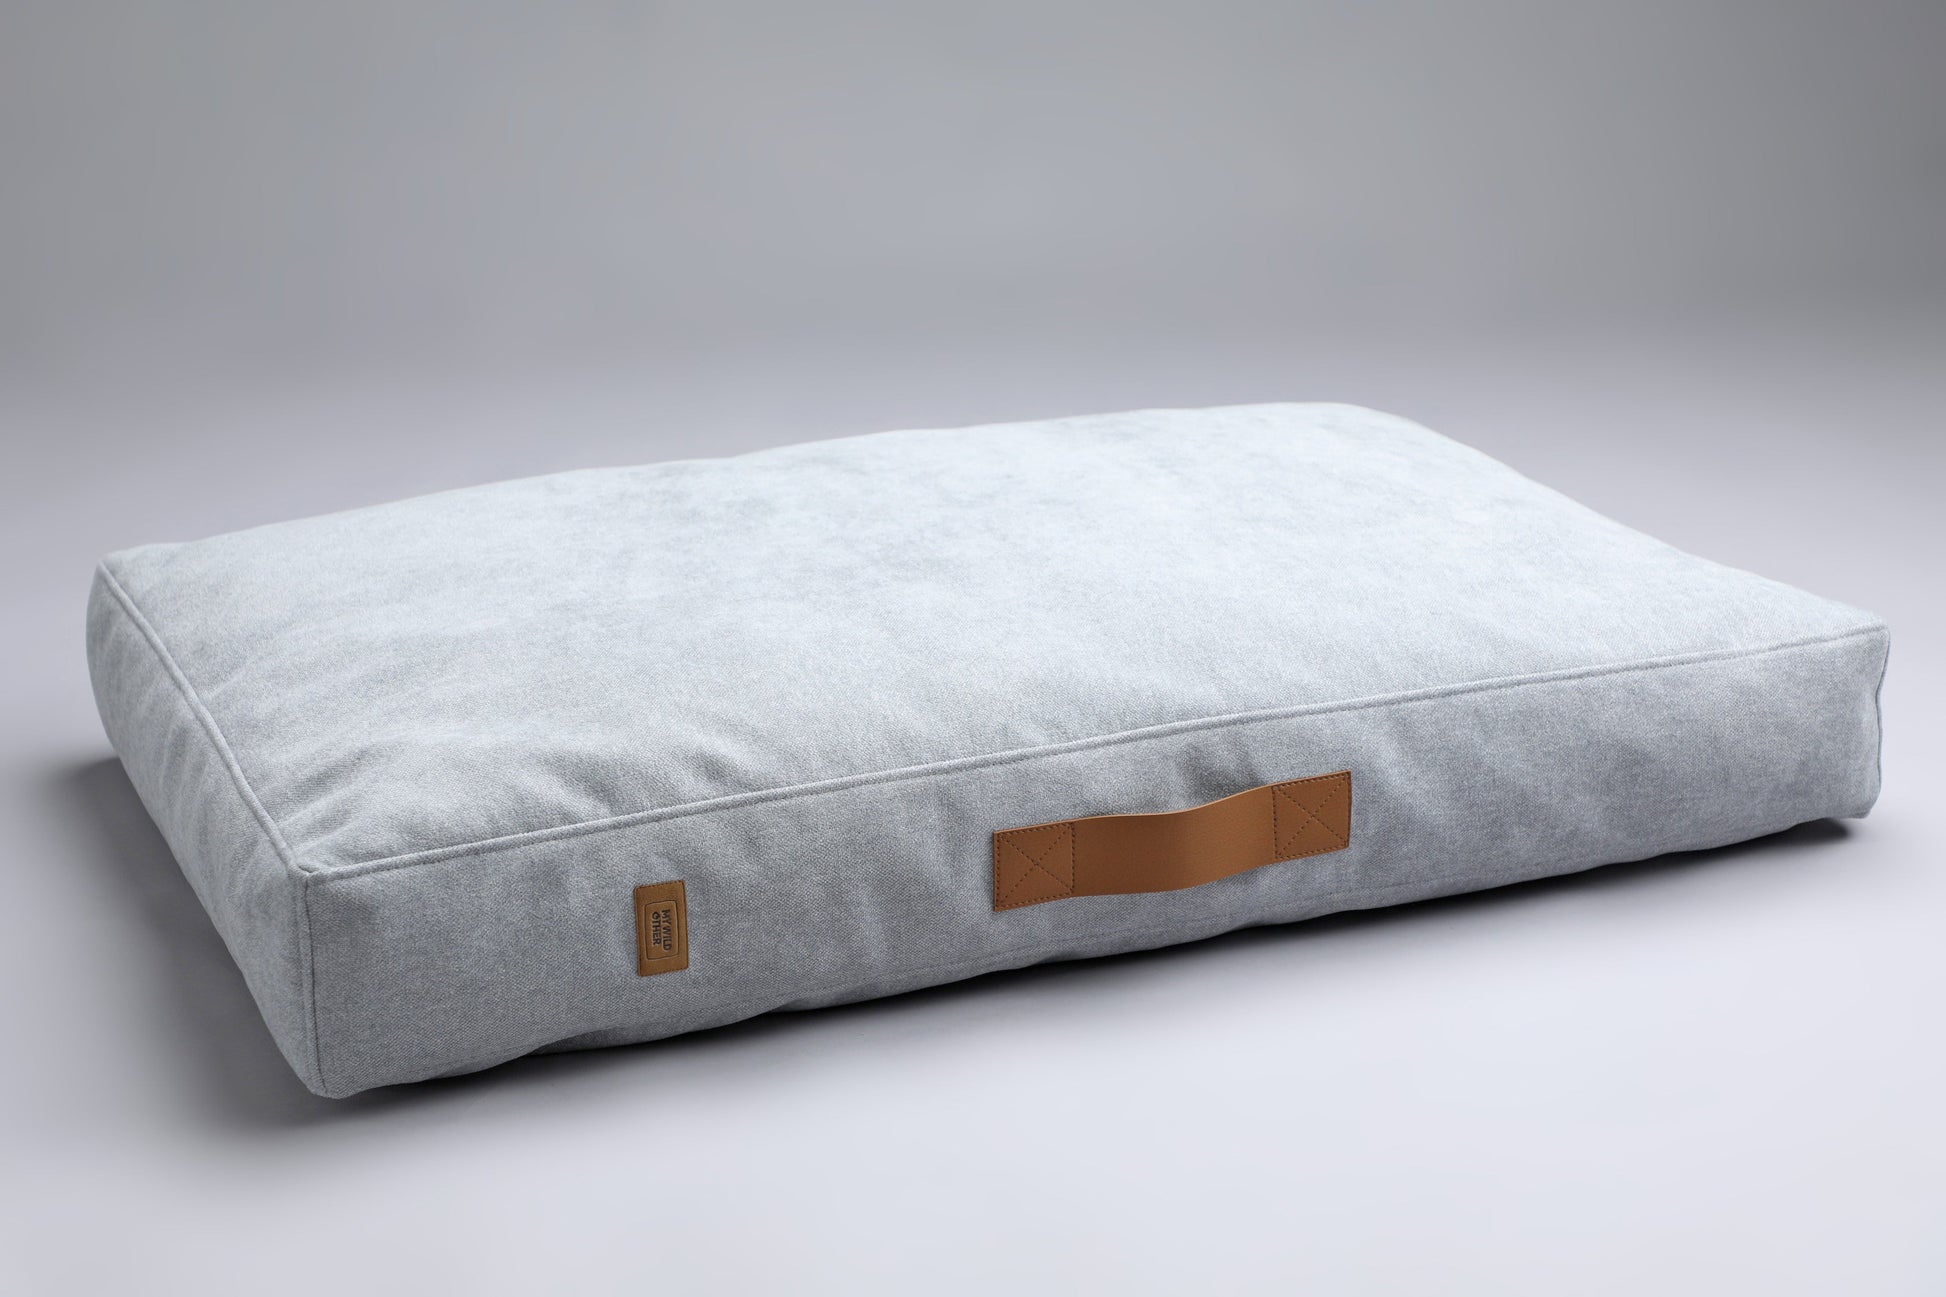 XL only | Scandinavian design dog bed | 2-sided | FOG GREY by My Wild Other